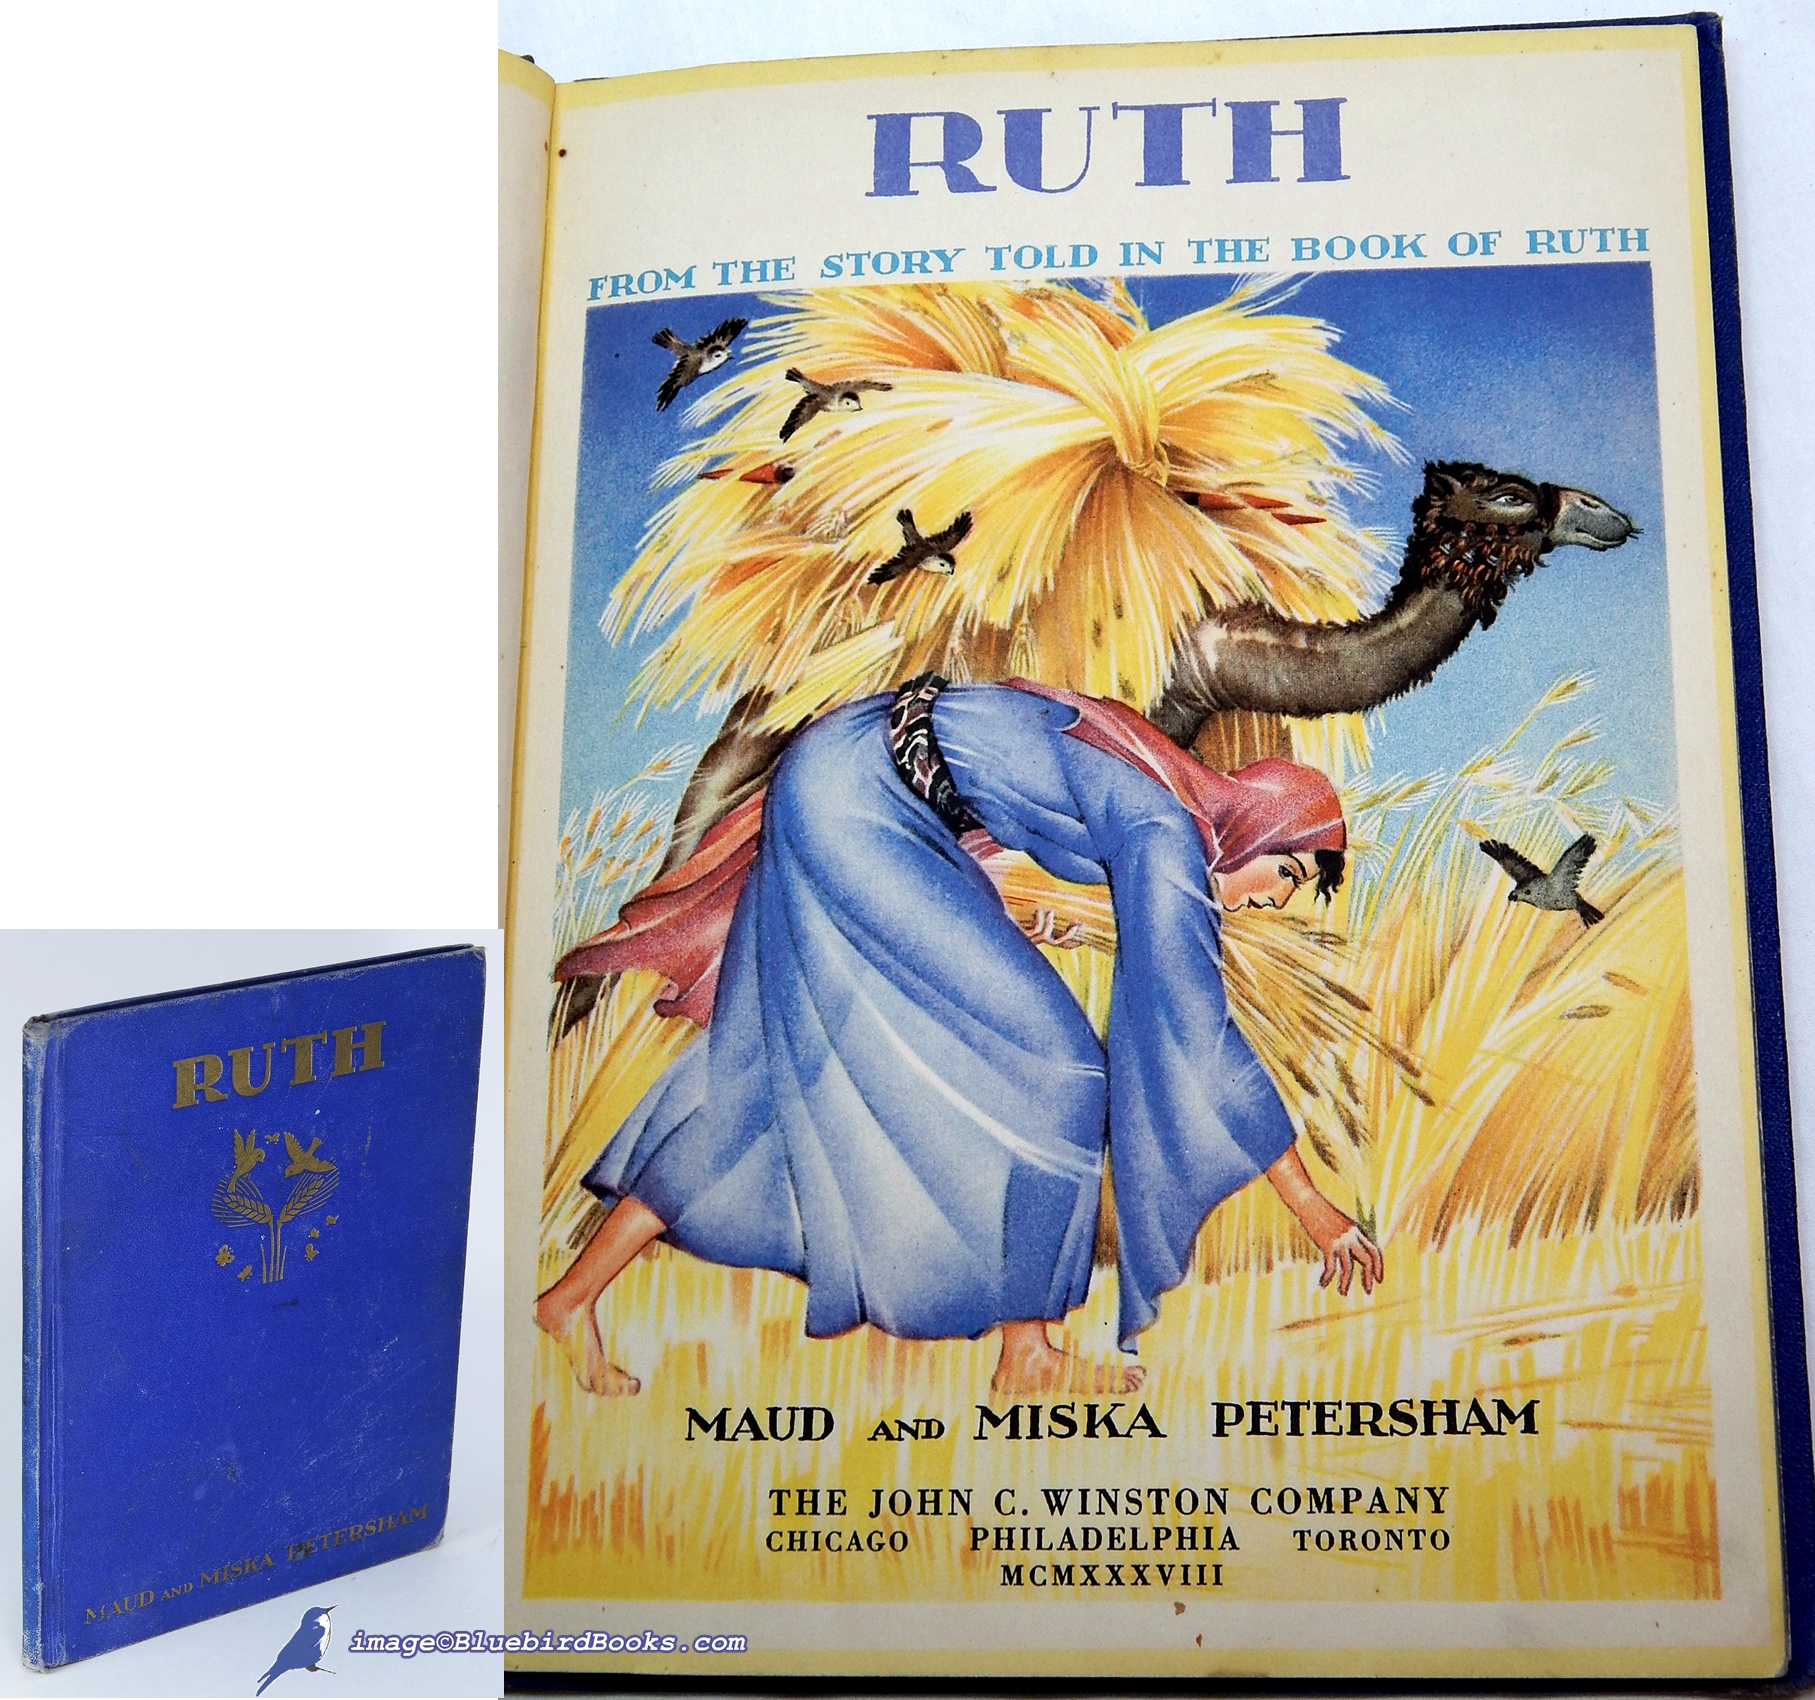 PETERSHAM, MAUD AND MISKA - Ruth: From the Story Told in the Book of Ruth